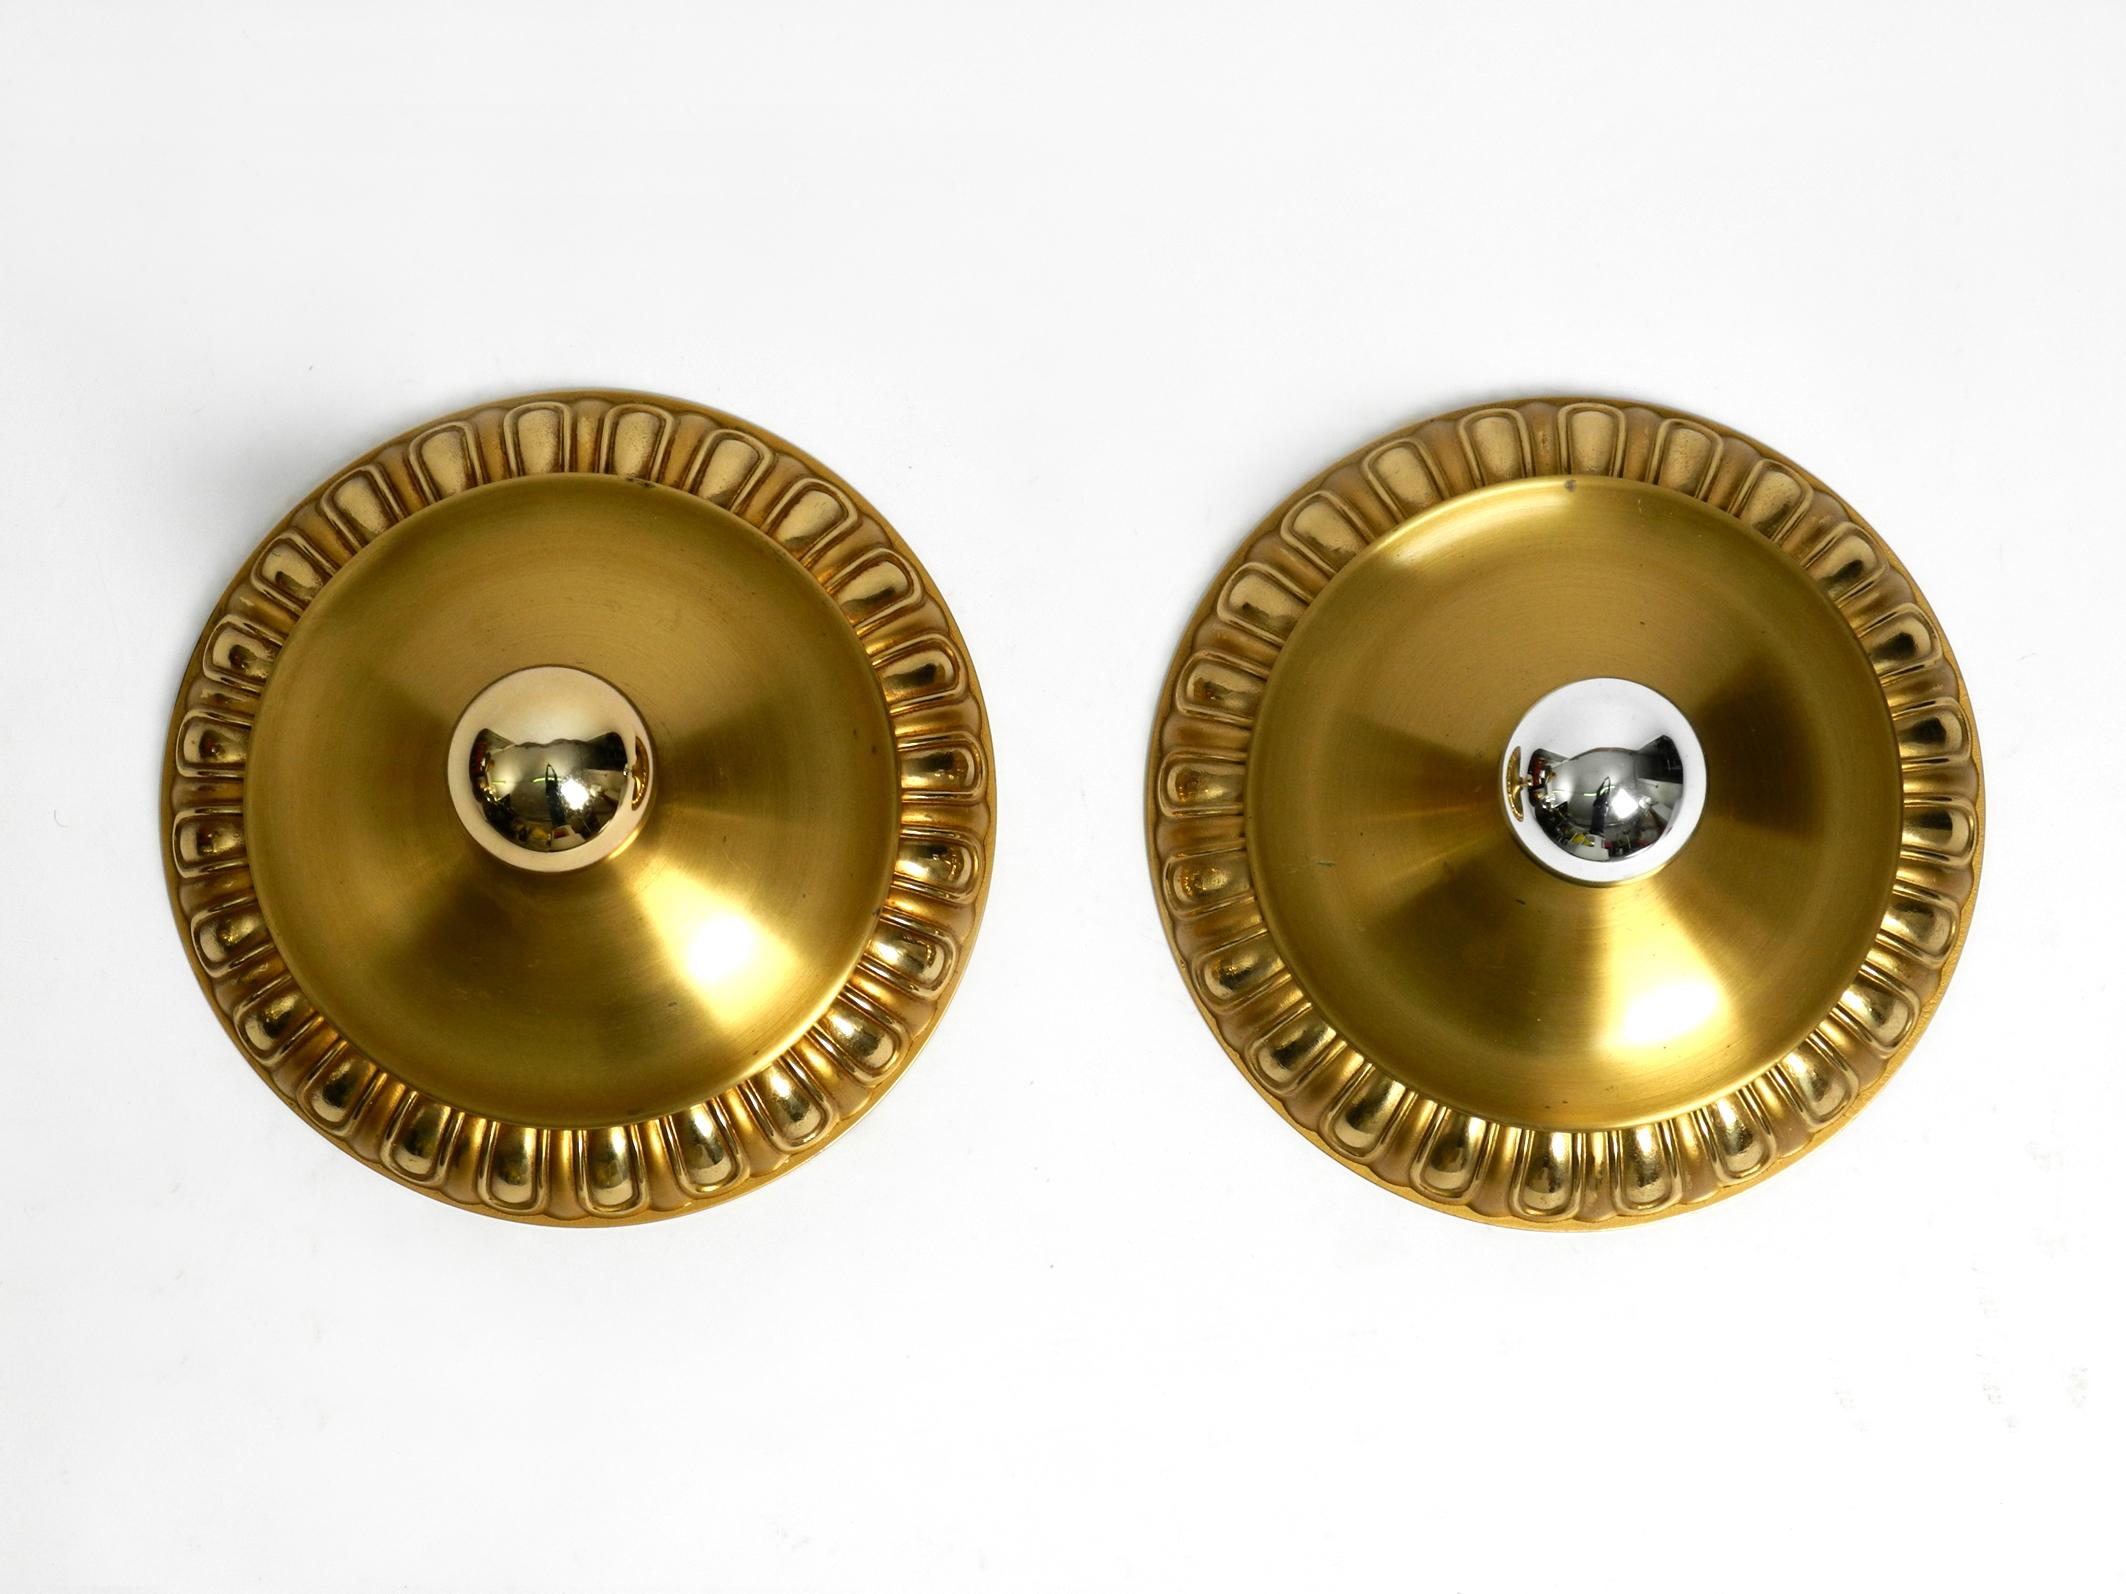 Pair of fancy 1960s space age pop art round wall lamps.
Manufacturer is Sölken lights. Made in Germany.
The outer ring is made of brass. The back is in white and the middle part are made of metal.
Fully functional with one E27 original metal